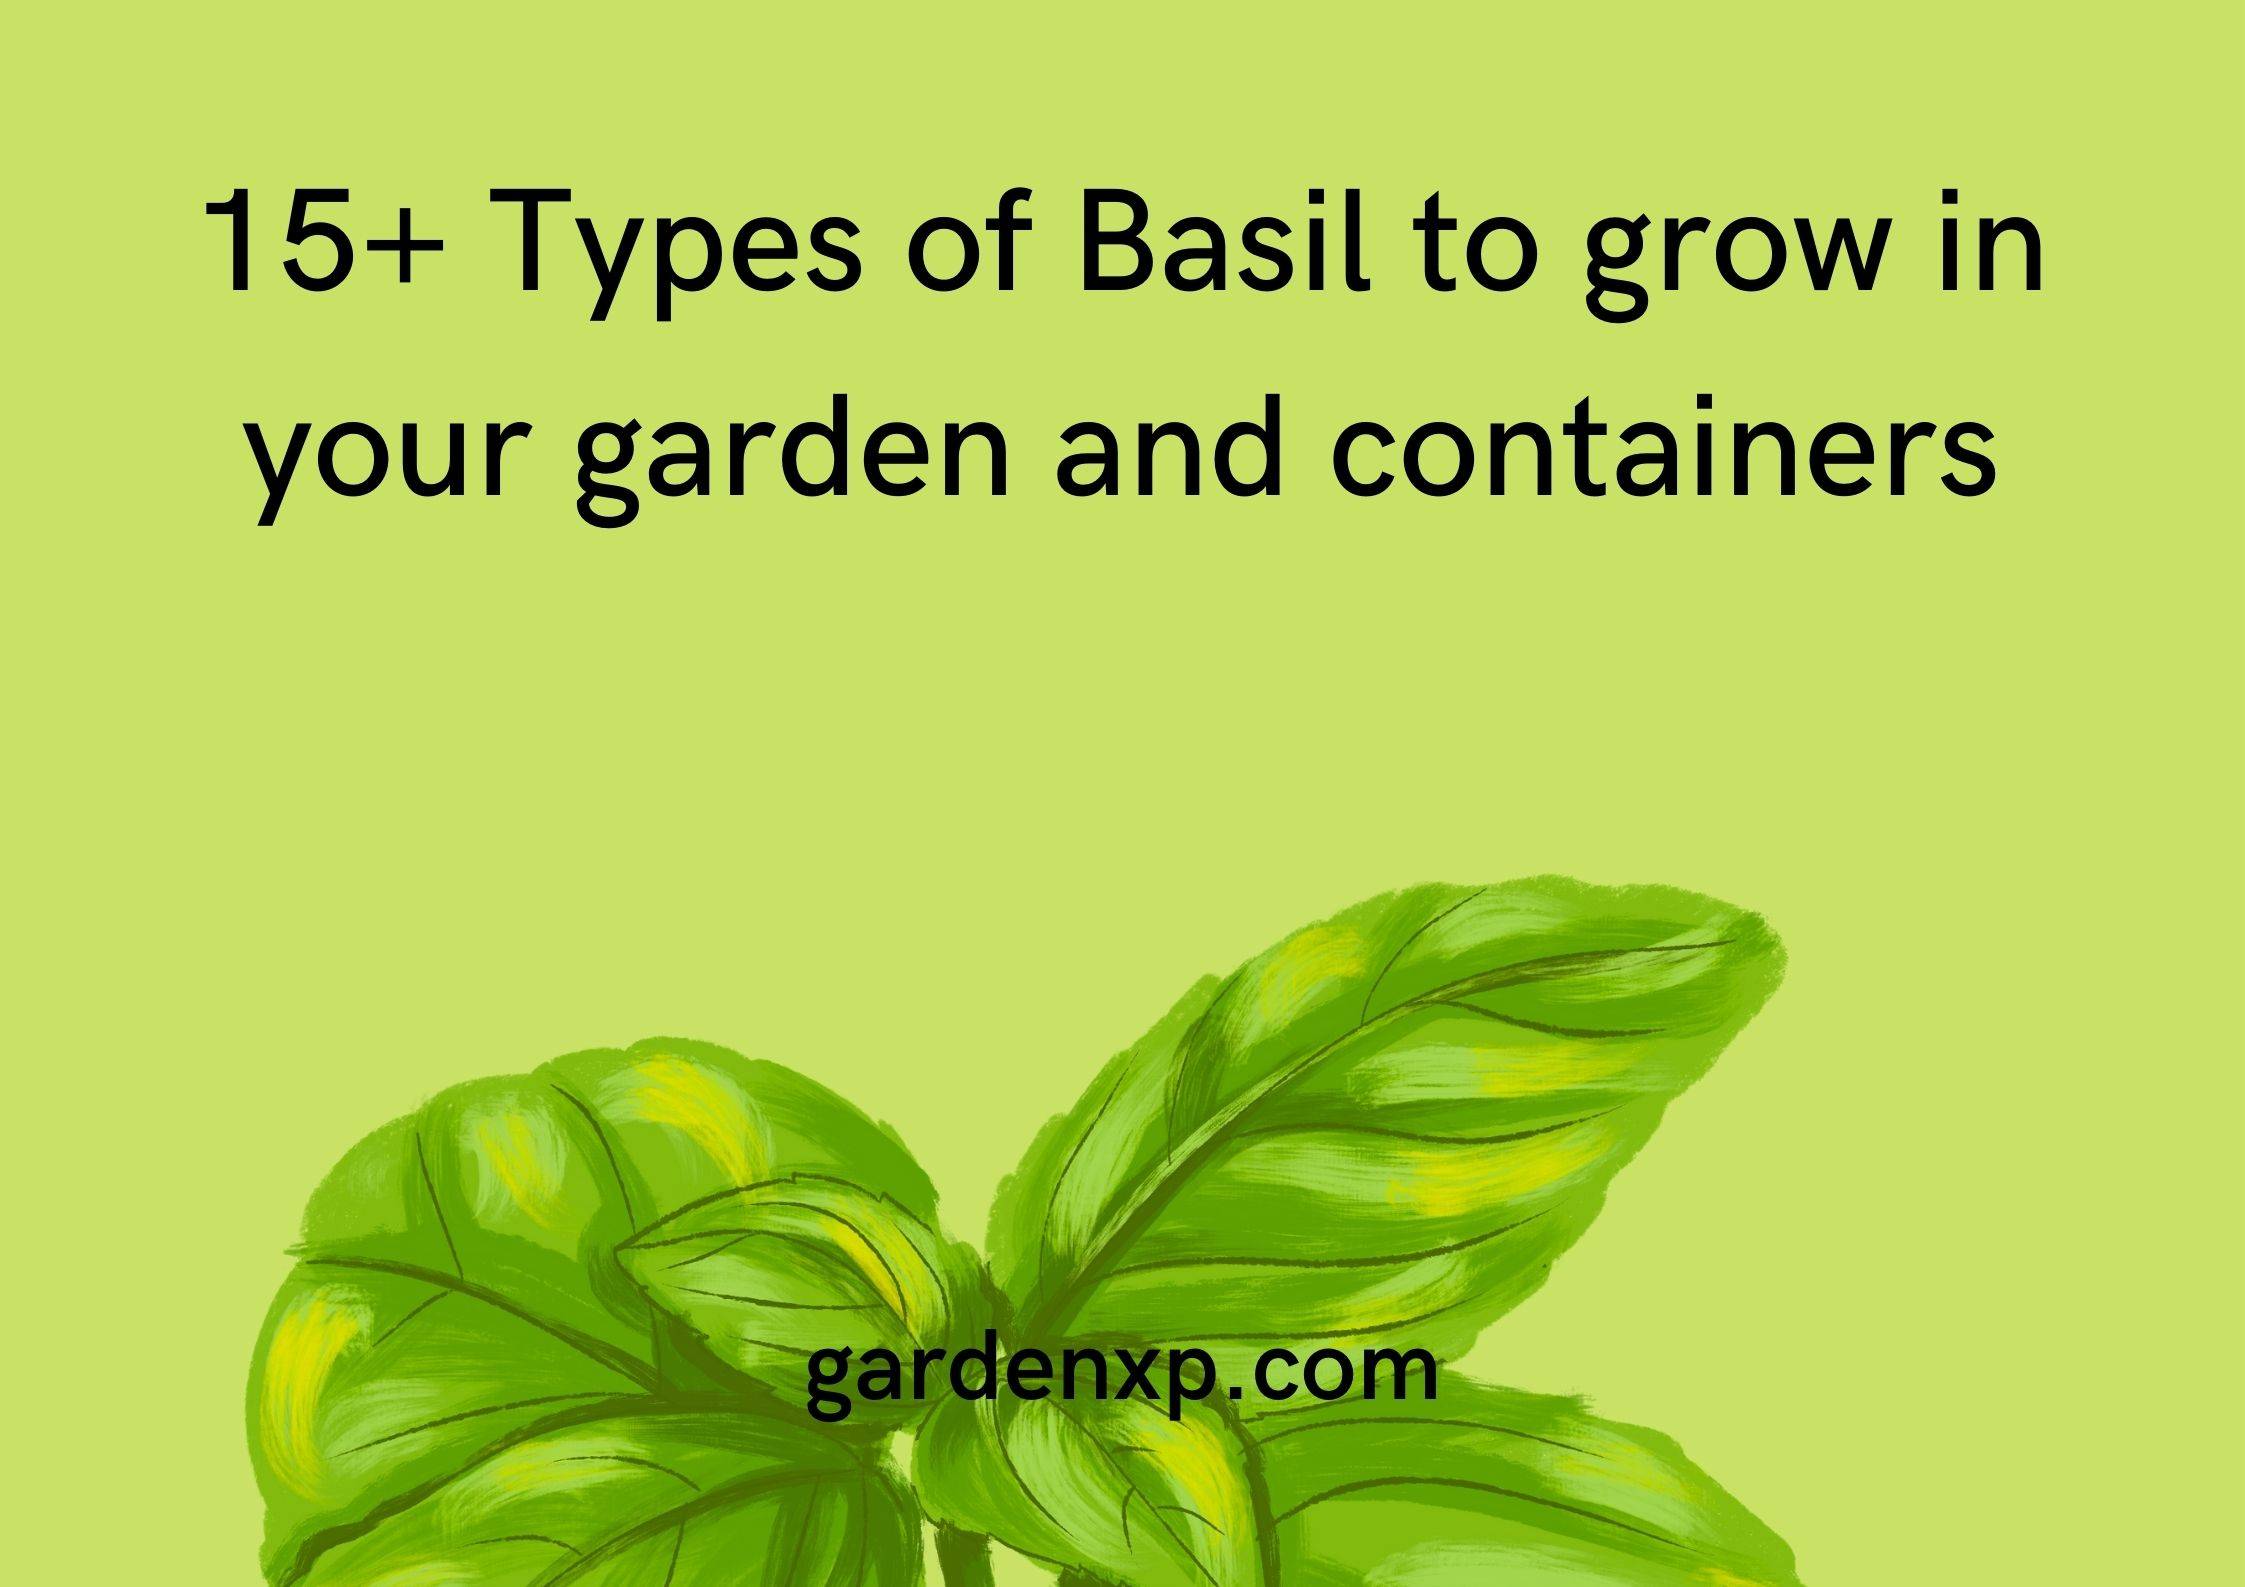 15+ Types of Basil to grow in your garden and containers